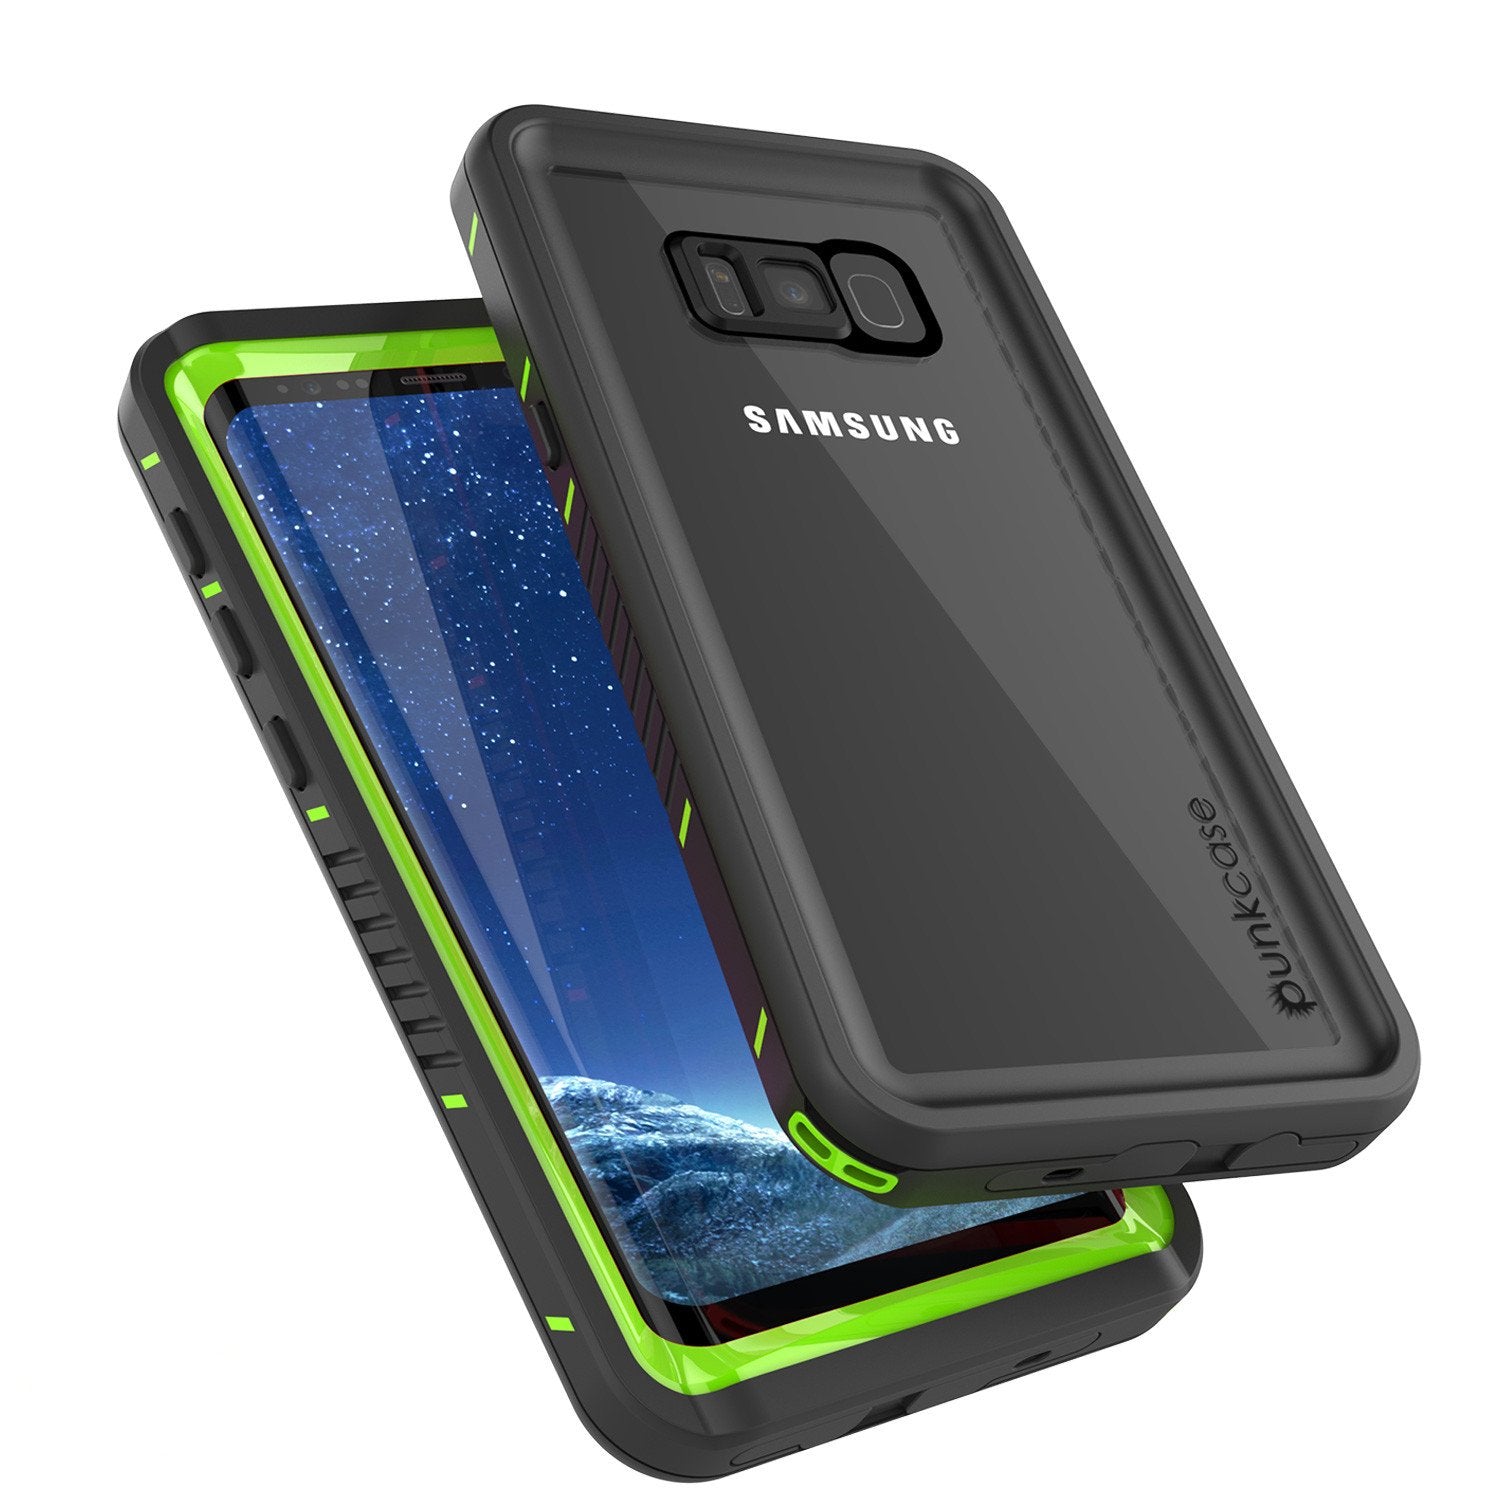 Galaxy S8 Case, Punkcase [Extreme Series] Armor Green Cover